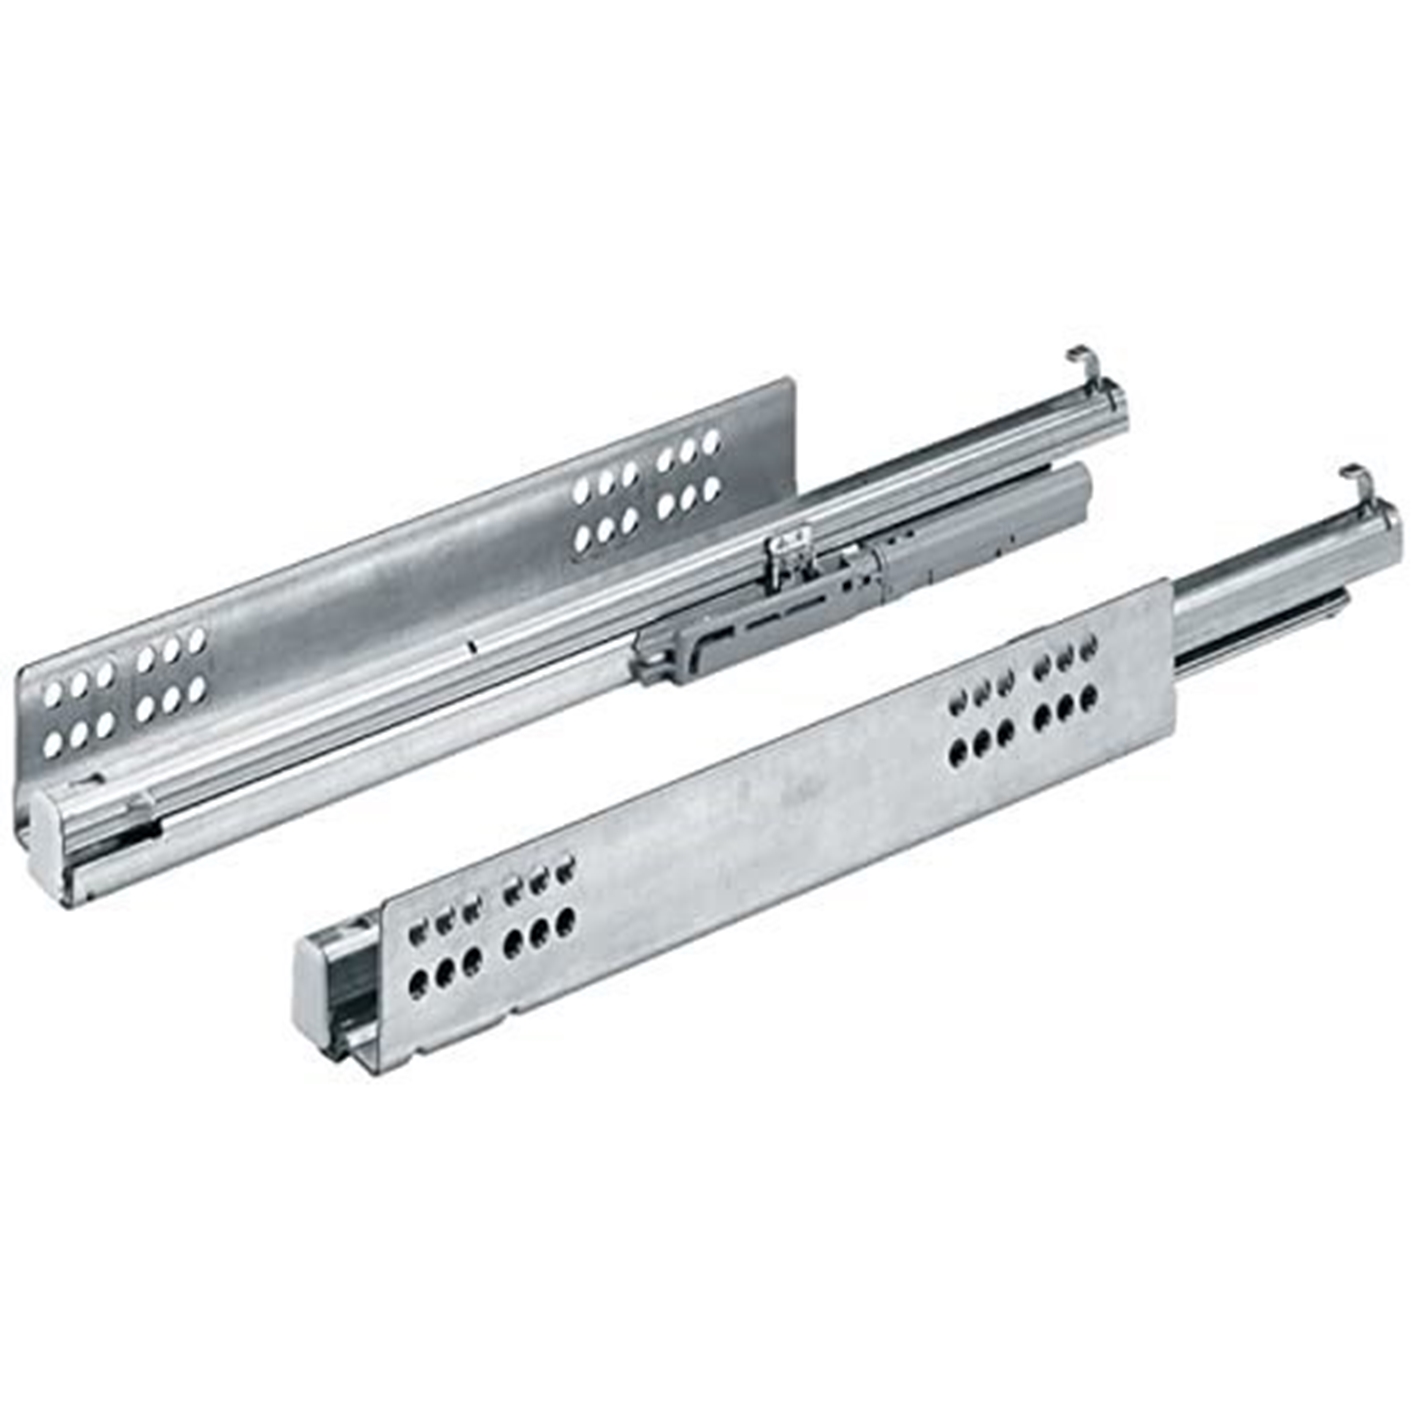 Ray âm giảm chấn ACTRO 5D 250mm Hettich AT250-4F